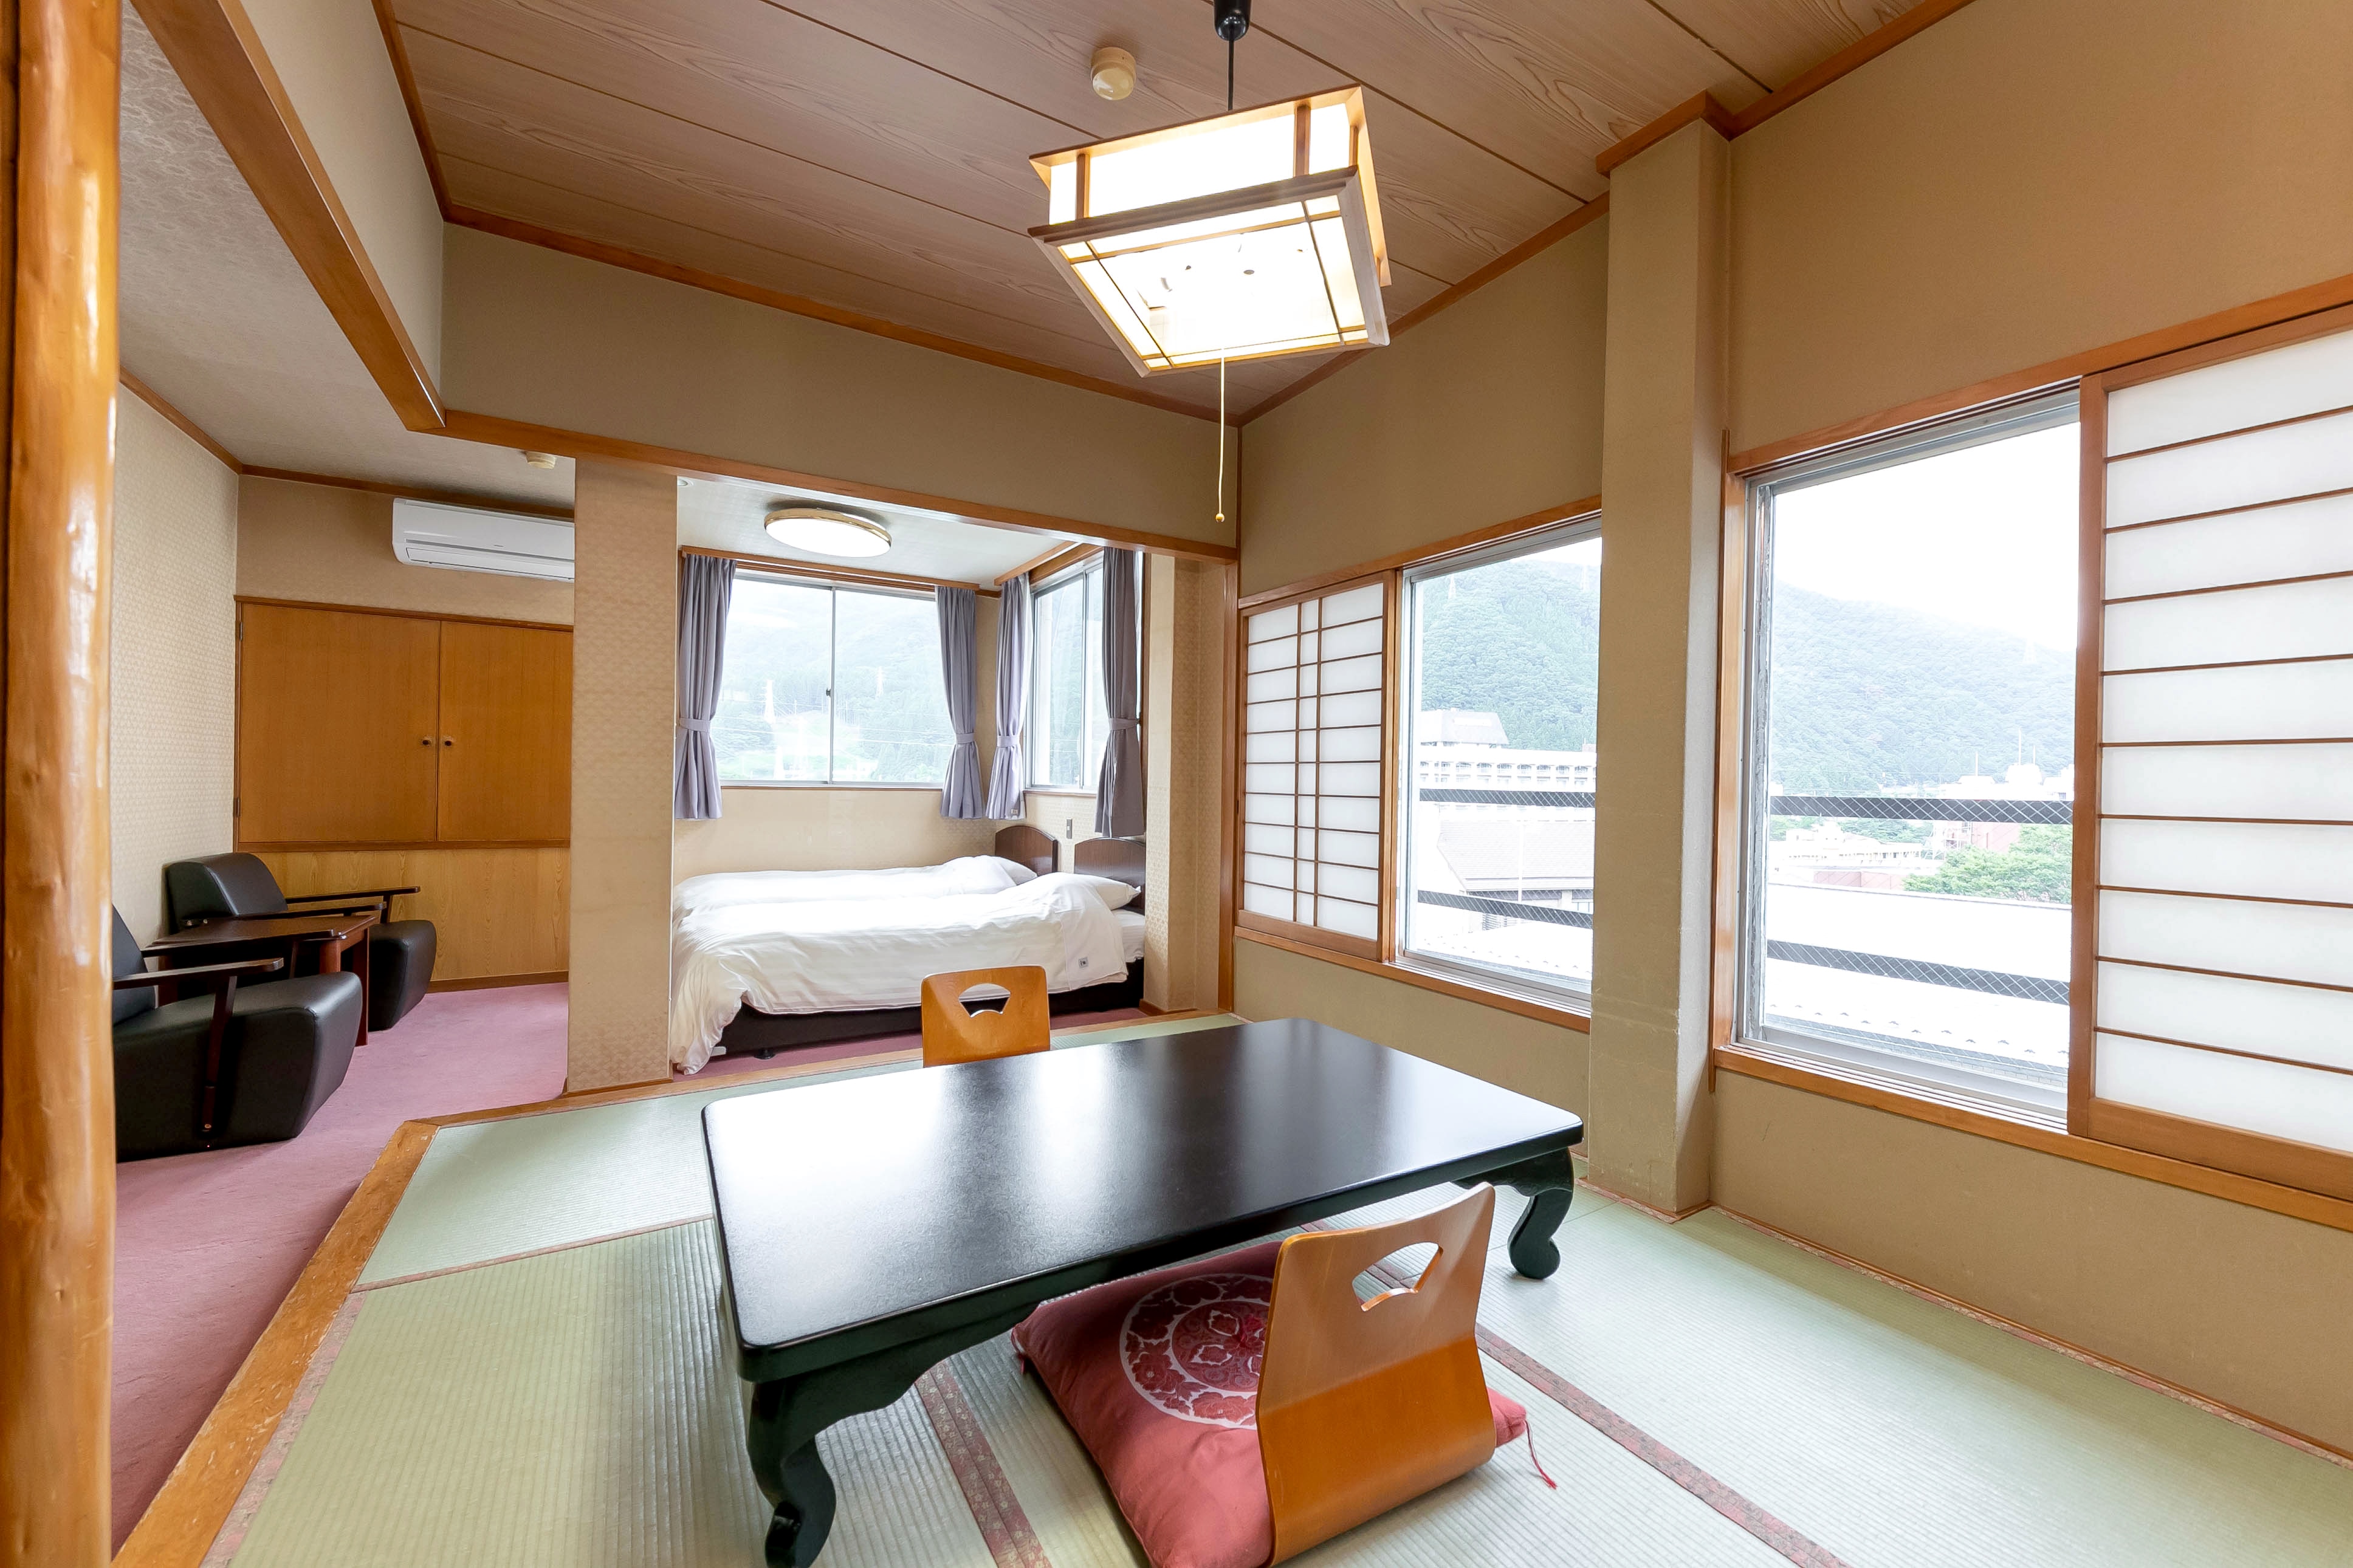 [Annex] An example of a Japanese and Western room